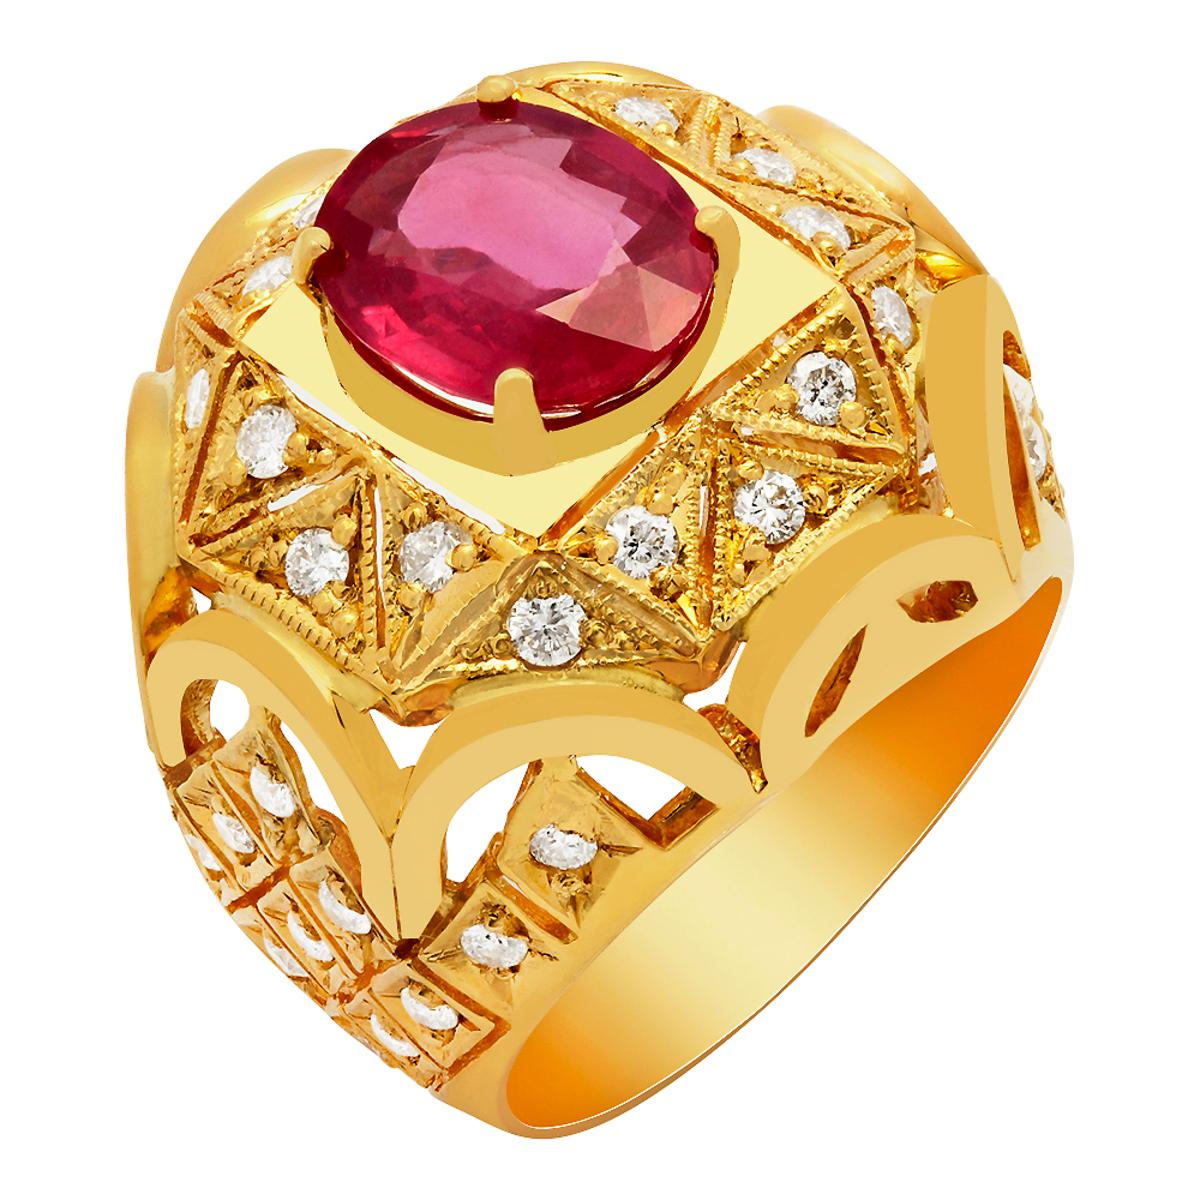 14K Gold 3.90ct Ruby and 1.08ct Diamond Ring